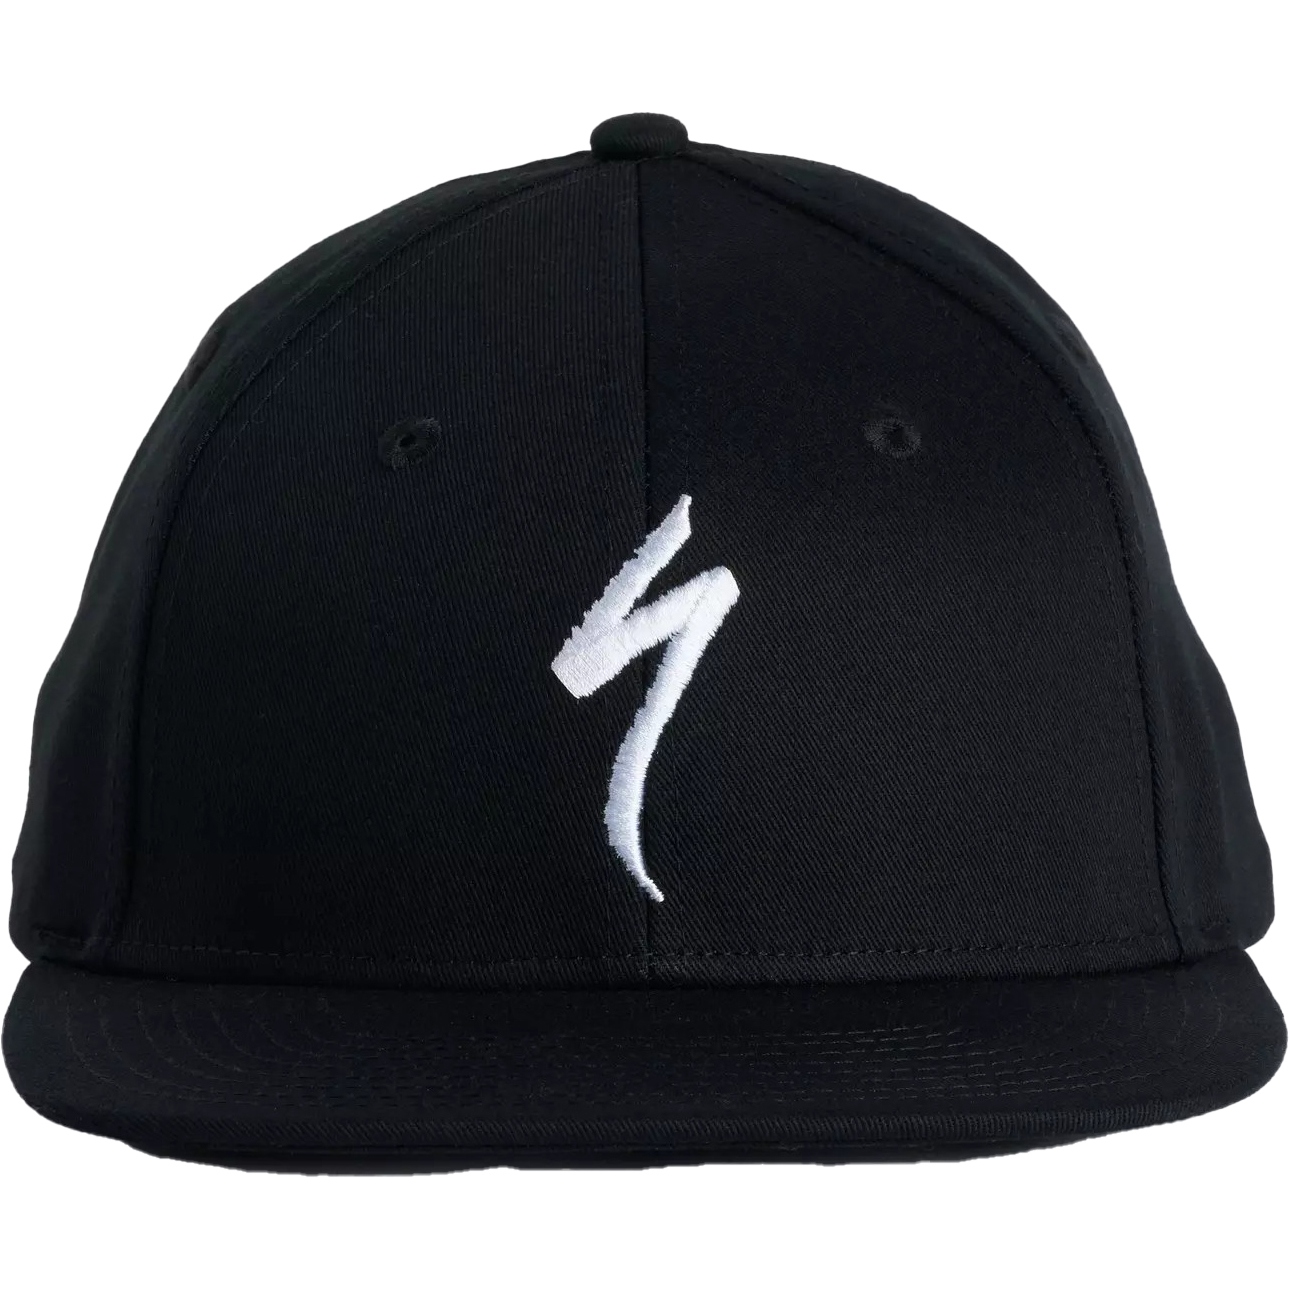 Picture of Specialized Flat Brim Hat - black/white